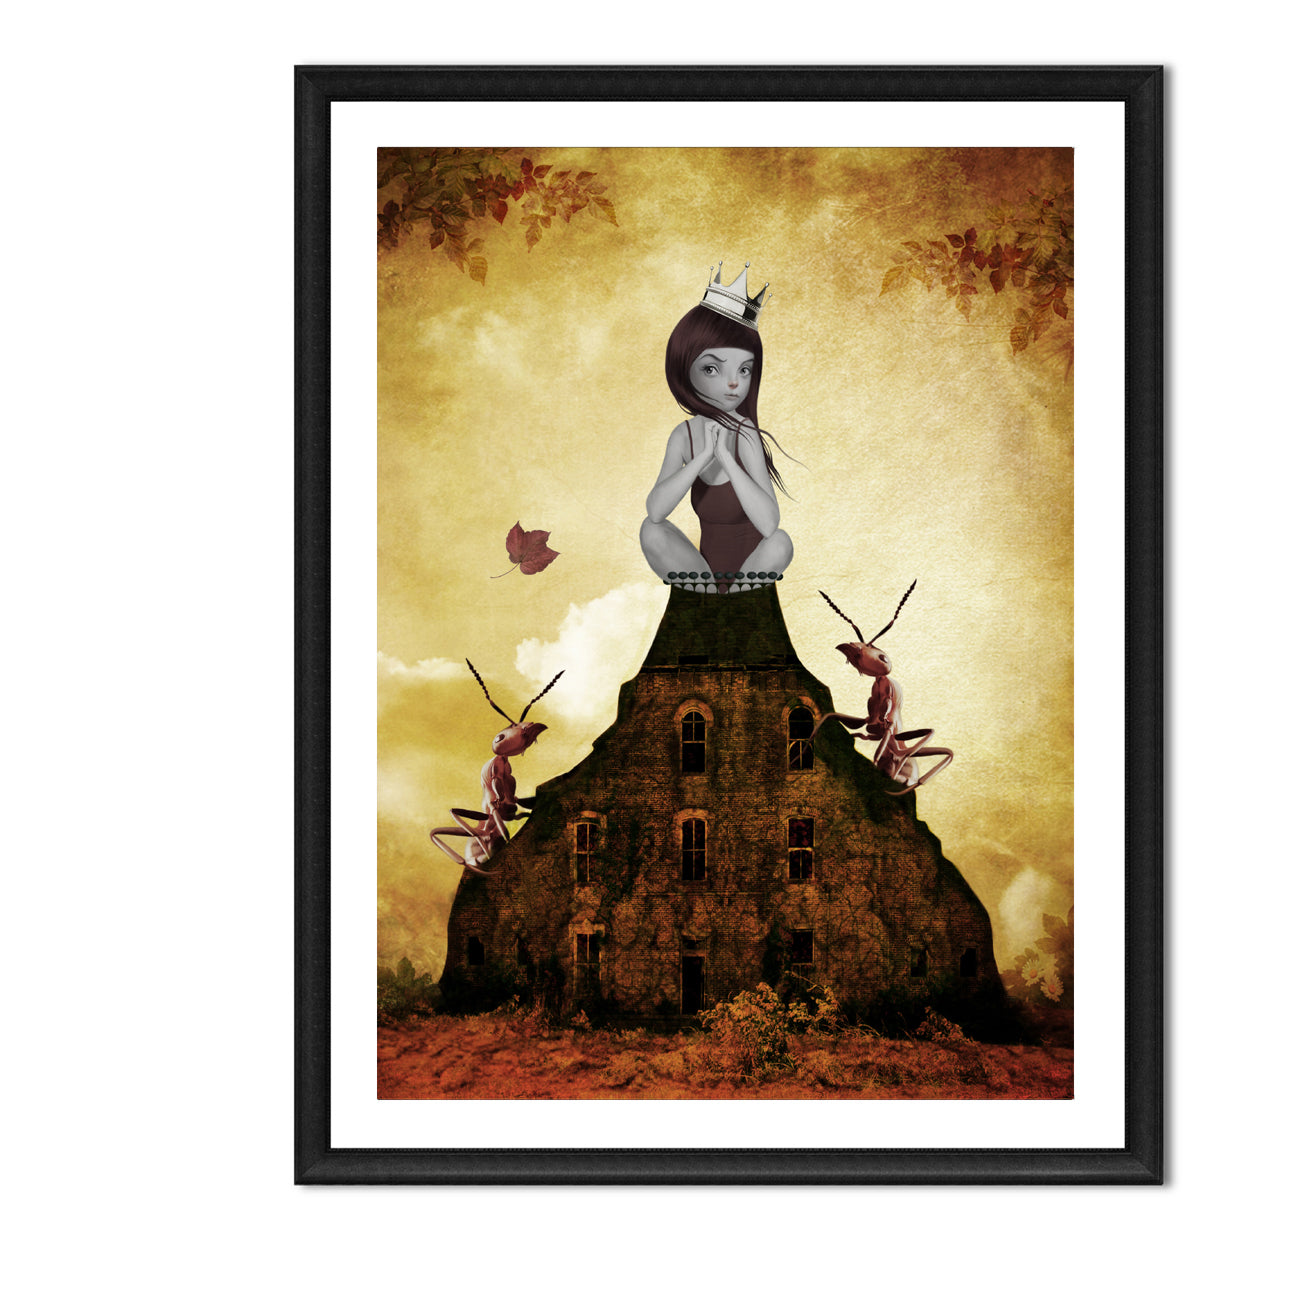 Surreal Ant Art Print - King Of The Castle